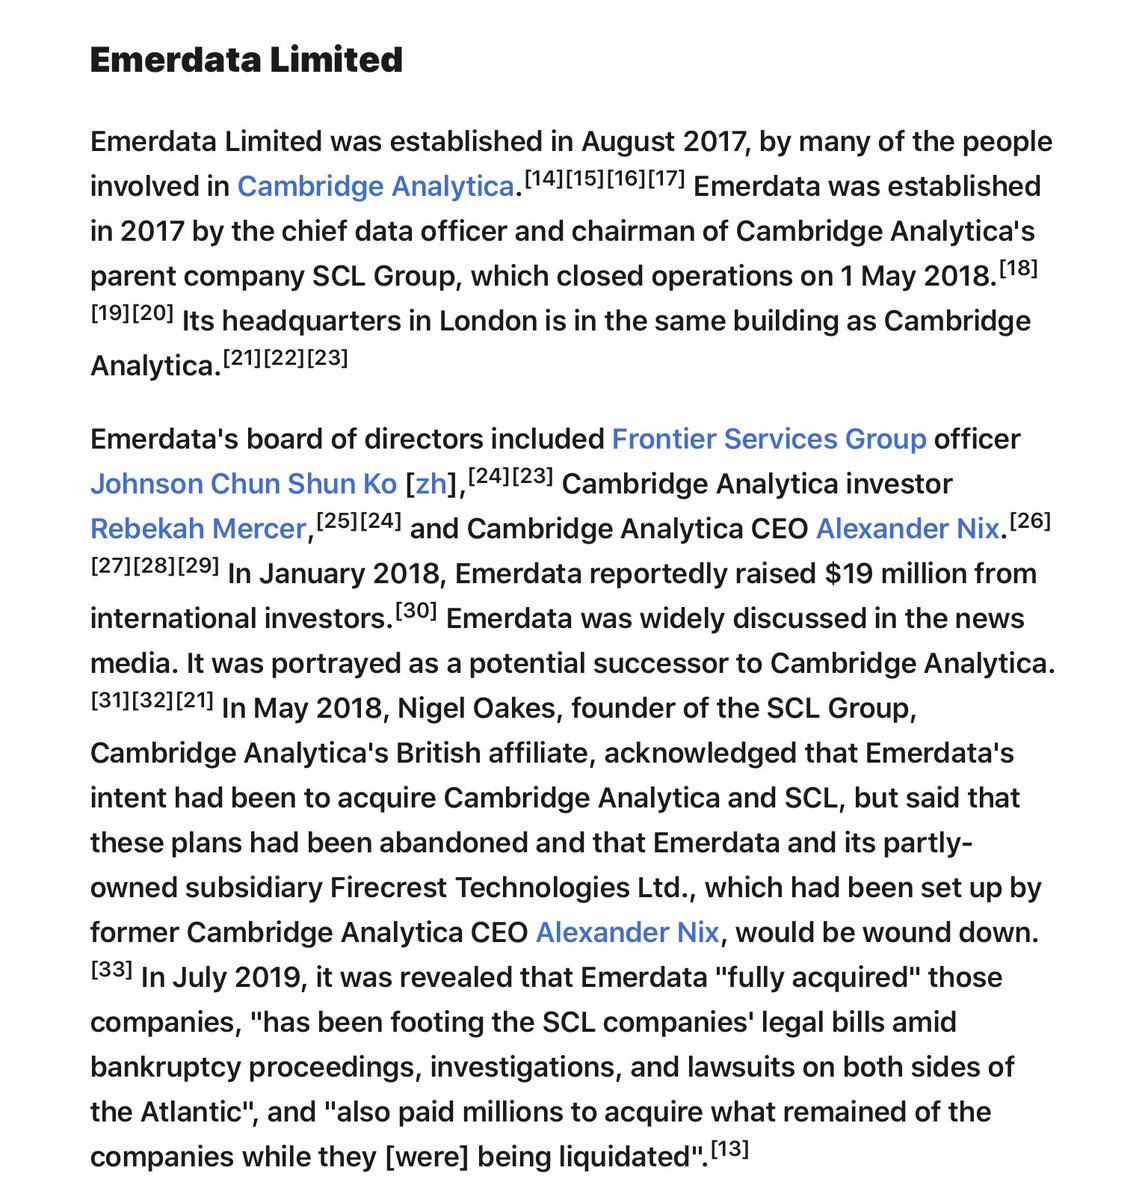 There is a Canadian connection. You’re thinking AIQ. Or maybe Emerdata? Yes, AIQ was involved with Cambridge Analytica and Brexit. Emerdata bought up what remained of Cambridge Analytica. These companies remain a threat to democracy. Emerdata is not alone in this market.